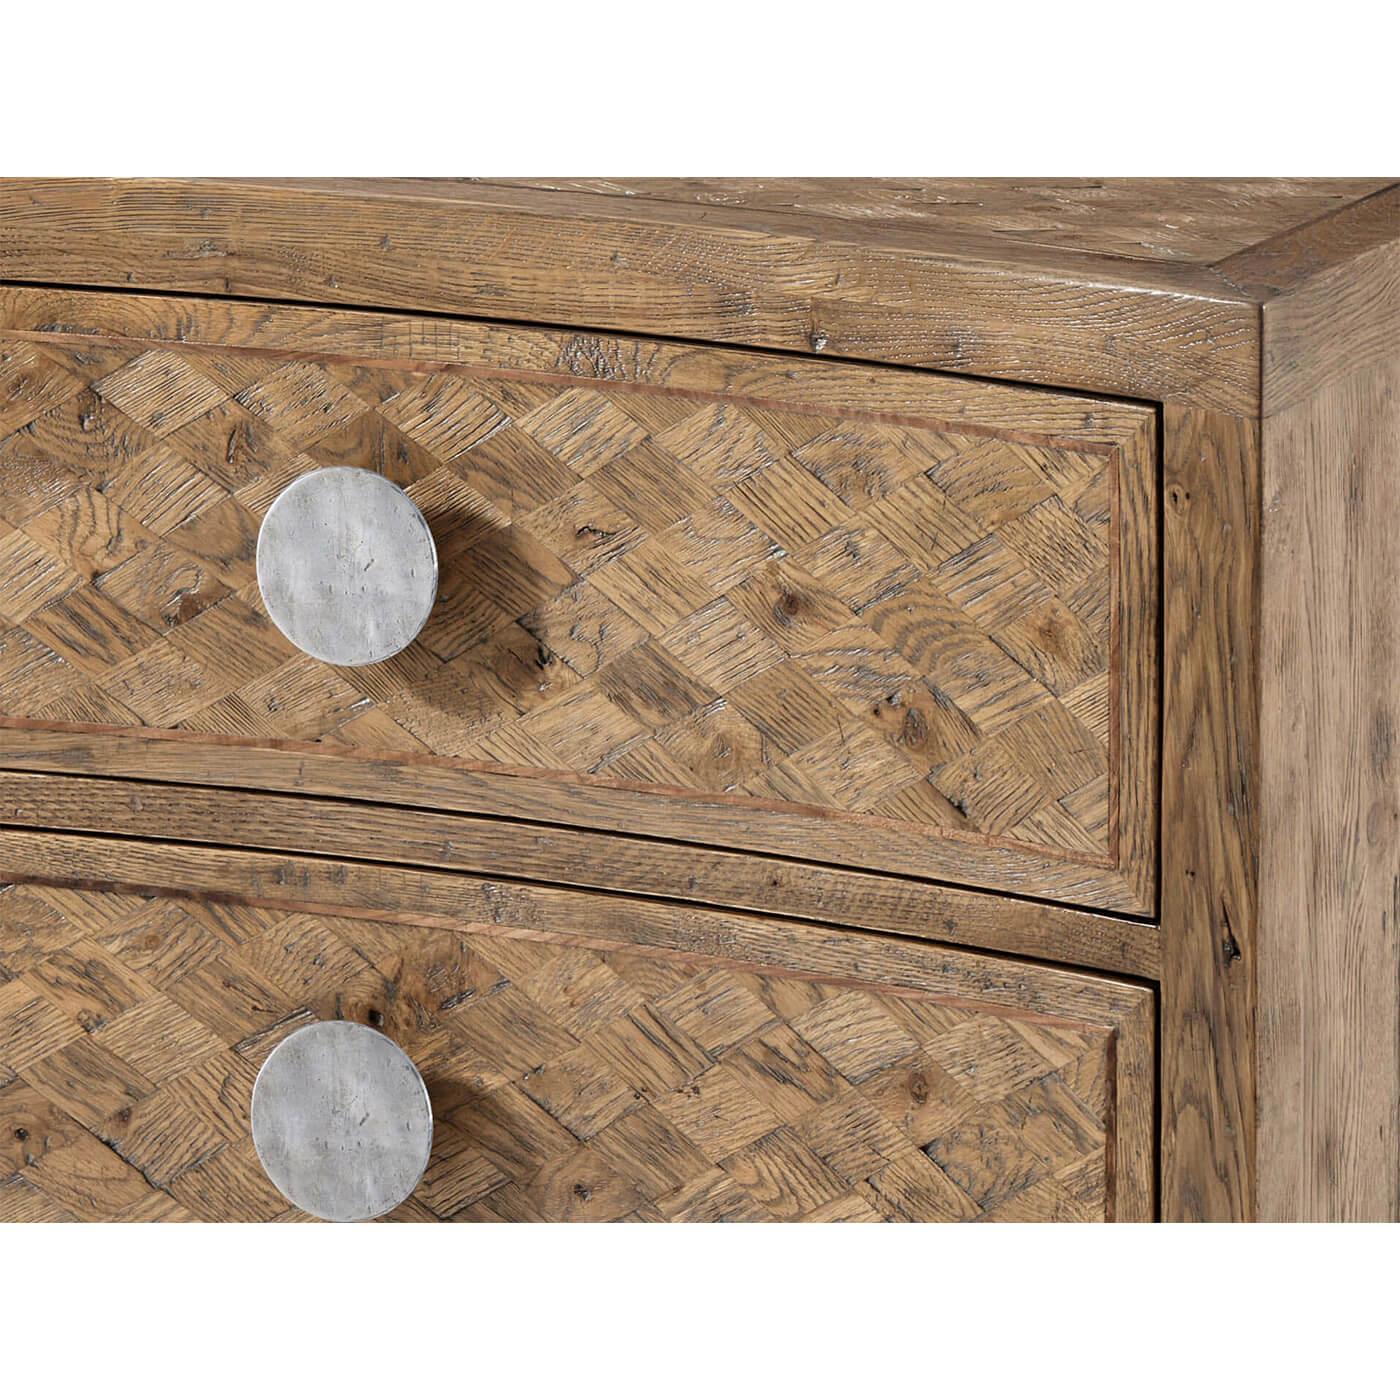 Modern rustic oak nightstand with diamond parquetry inlay, a concave front with two long drawers, on square tapered legs with large round vintage style metal pulls.

Dimensions: 36